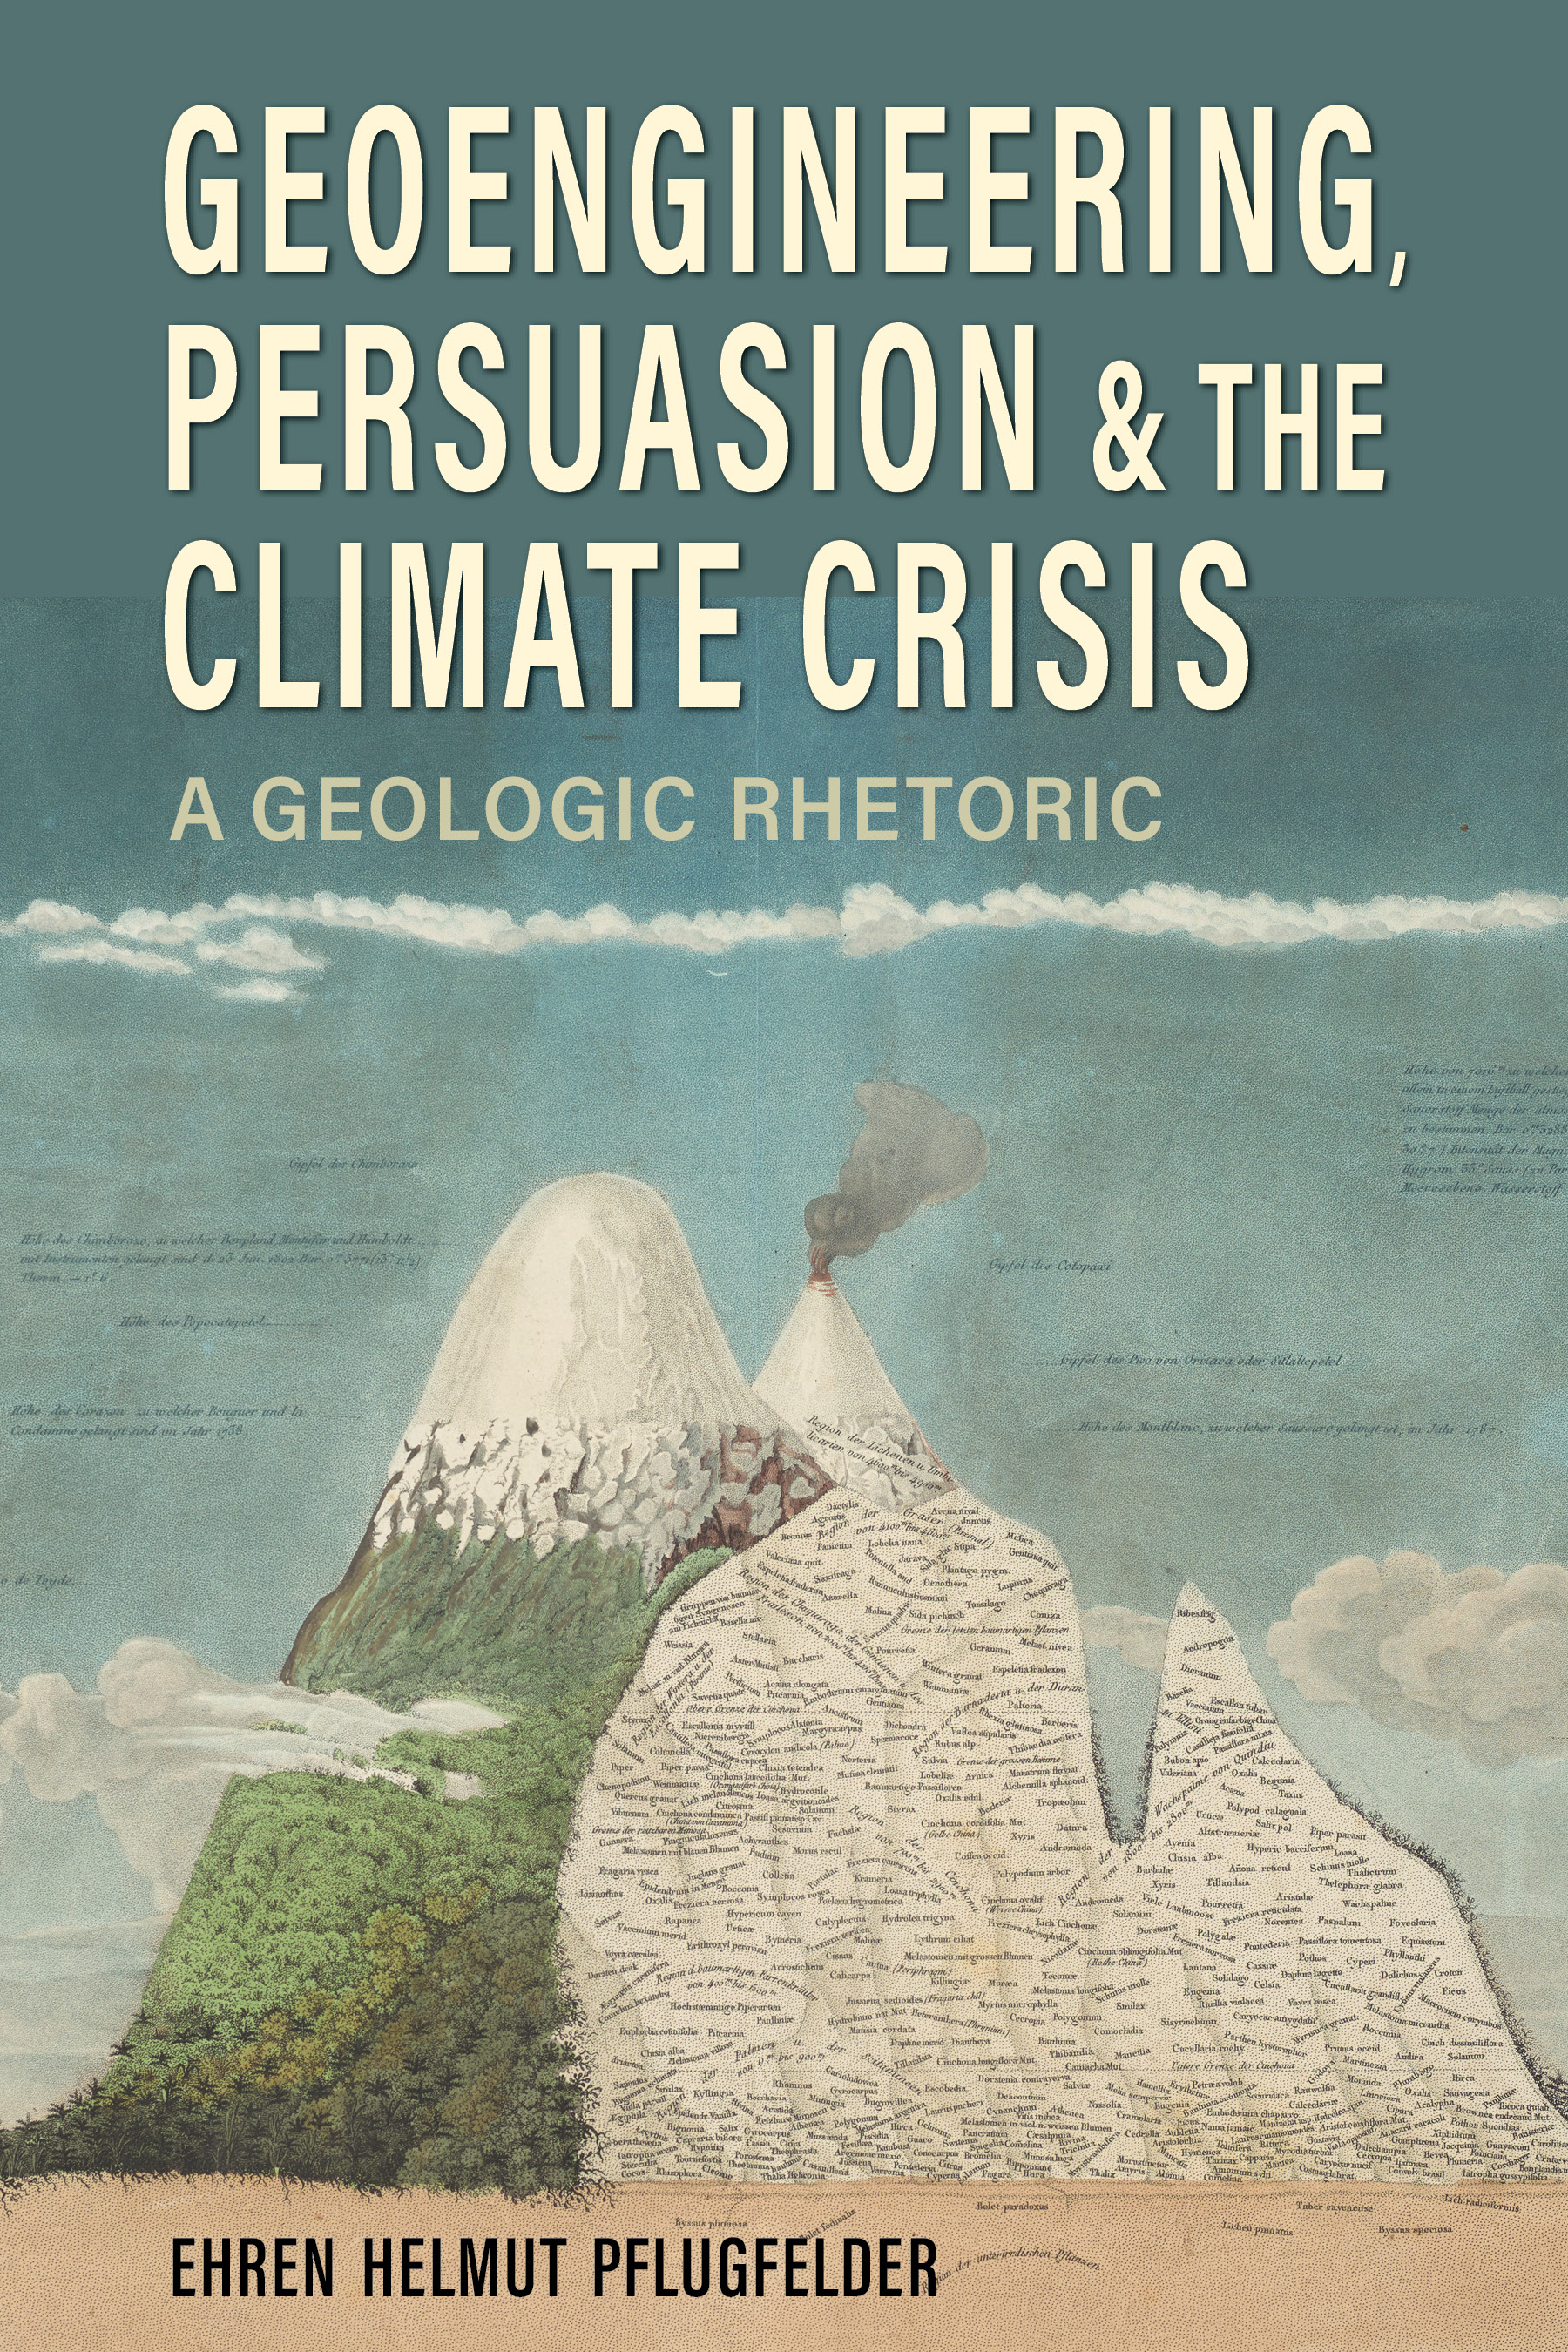 Geoengineering, Persuasion, and the Climate Crisis